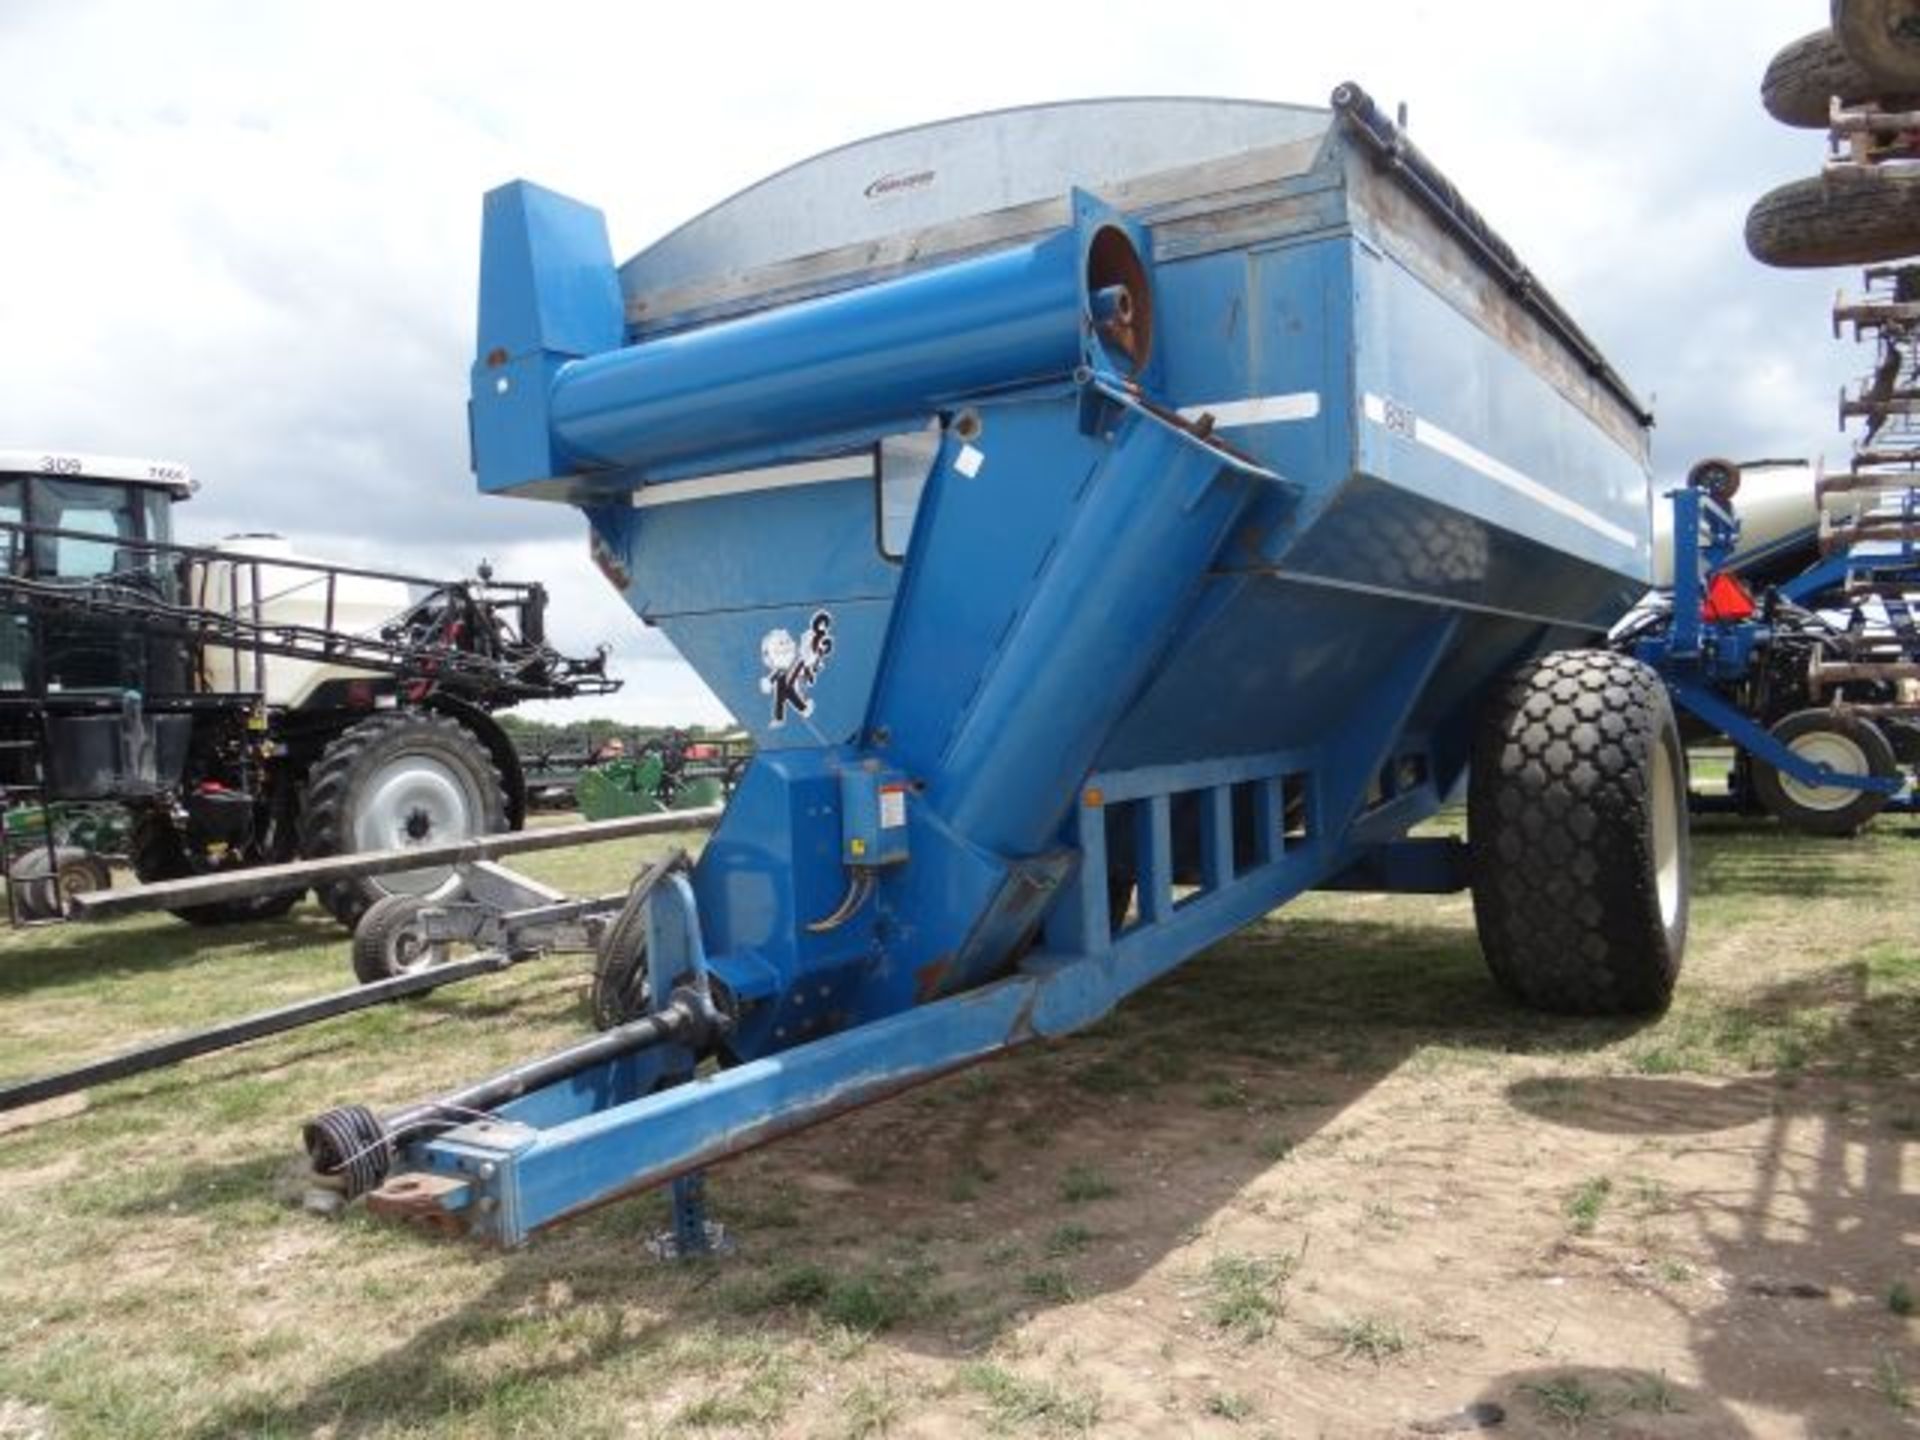 Kinze 840 Grain Cart, 1995 #147837, New Augers Last Year, Tarp, Manual in the Shed - Image 2 of 3